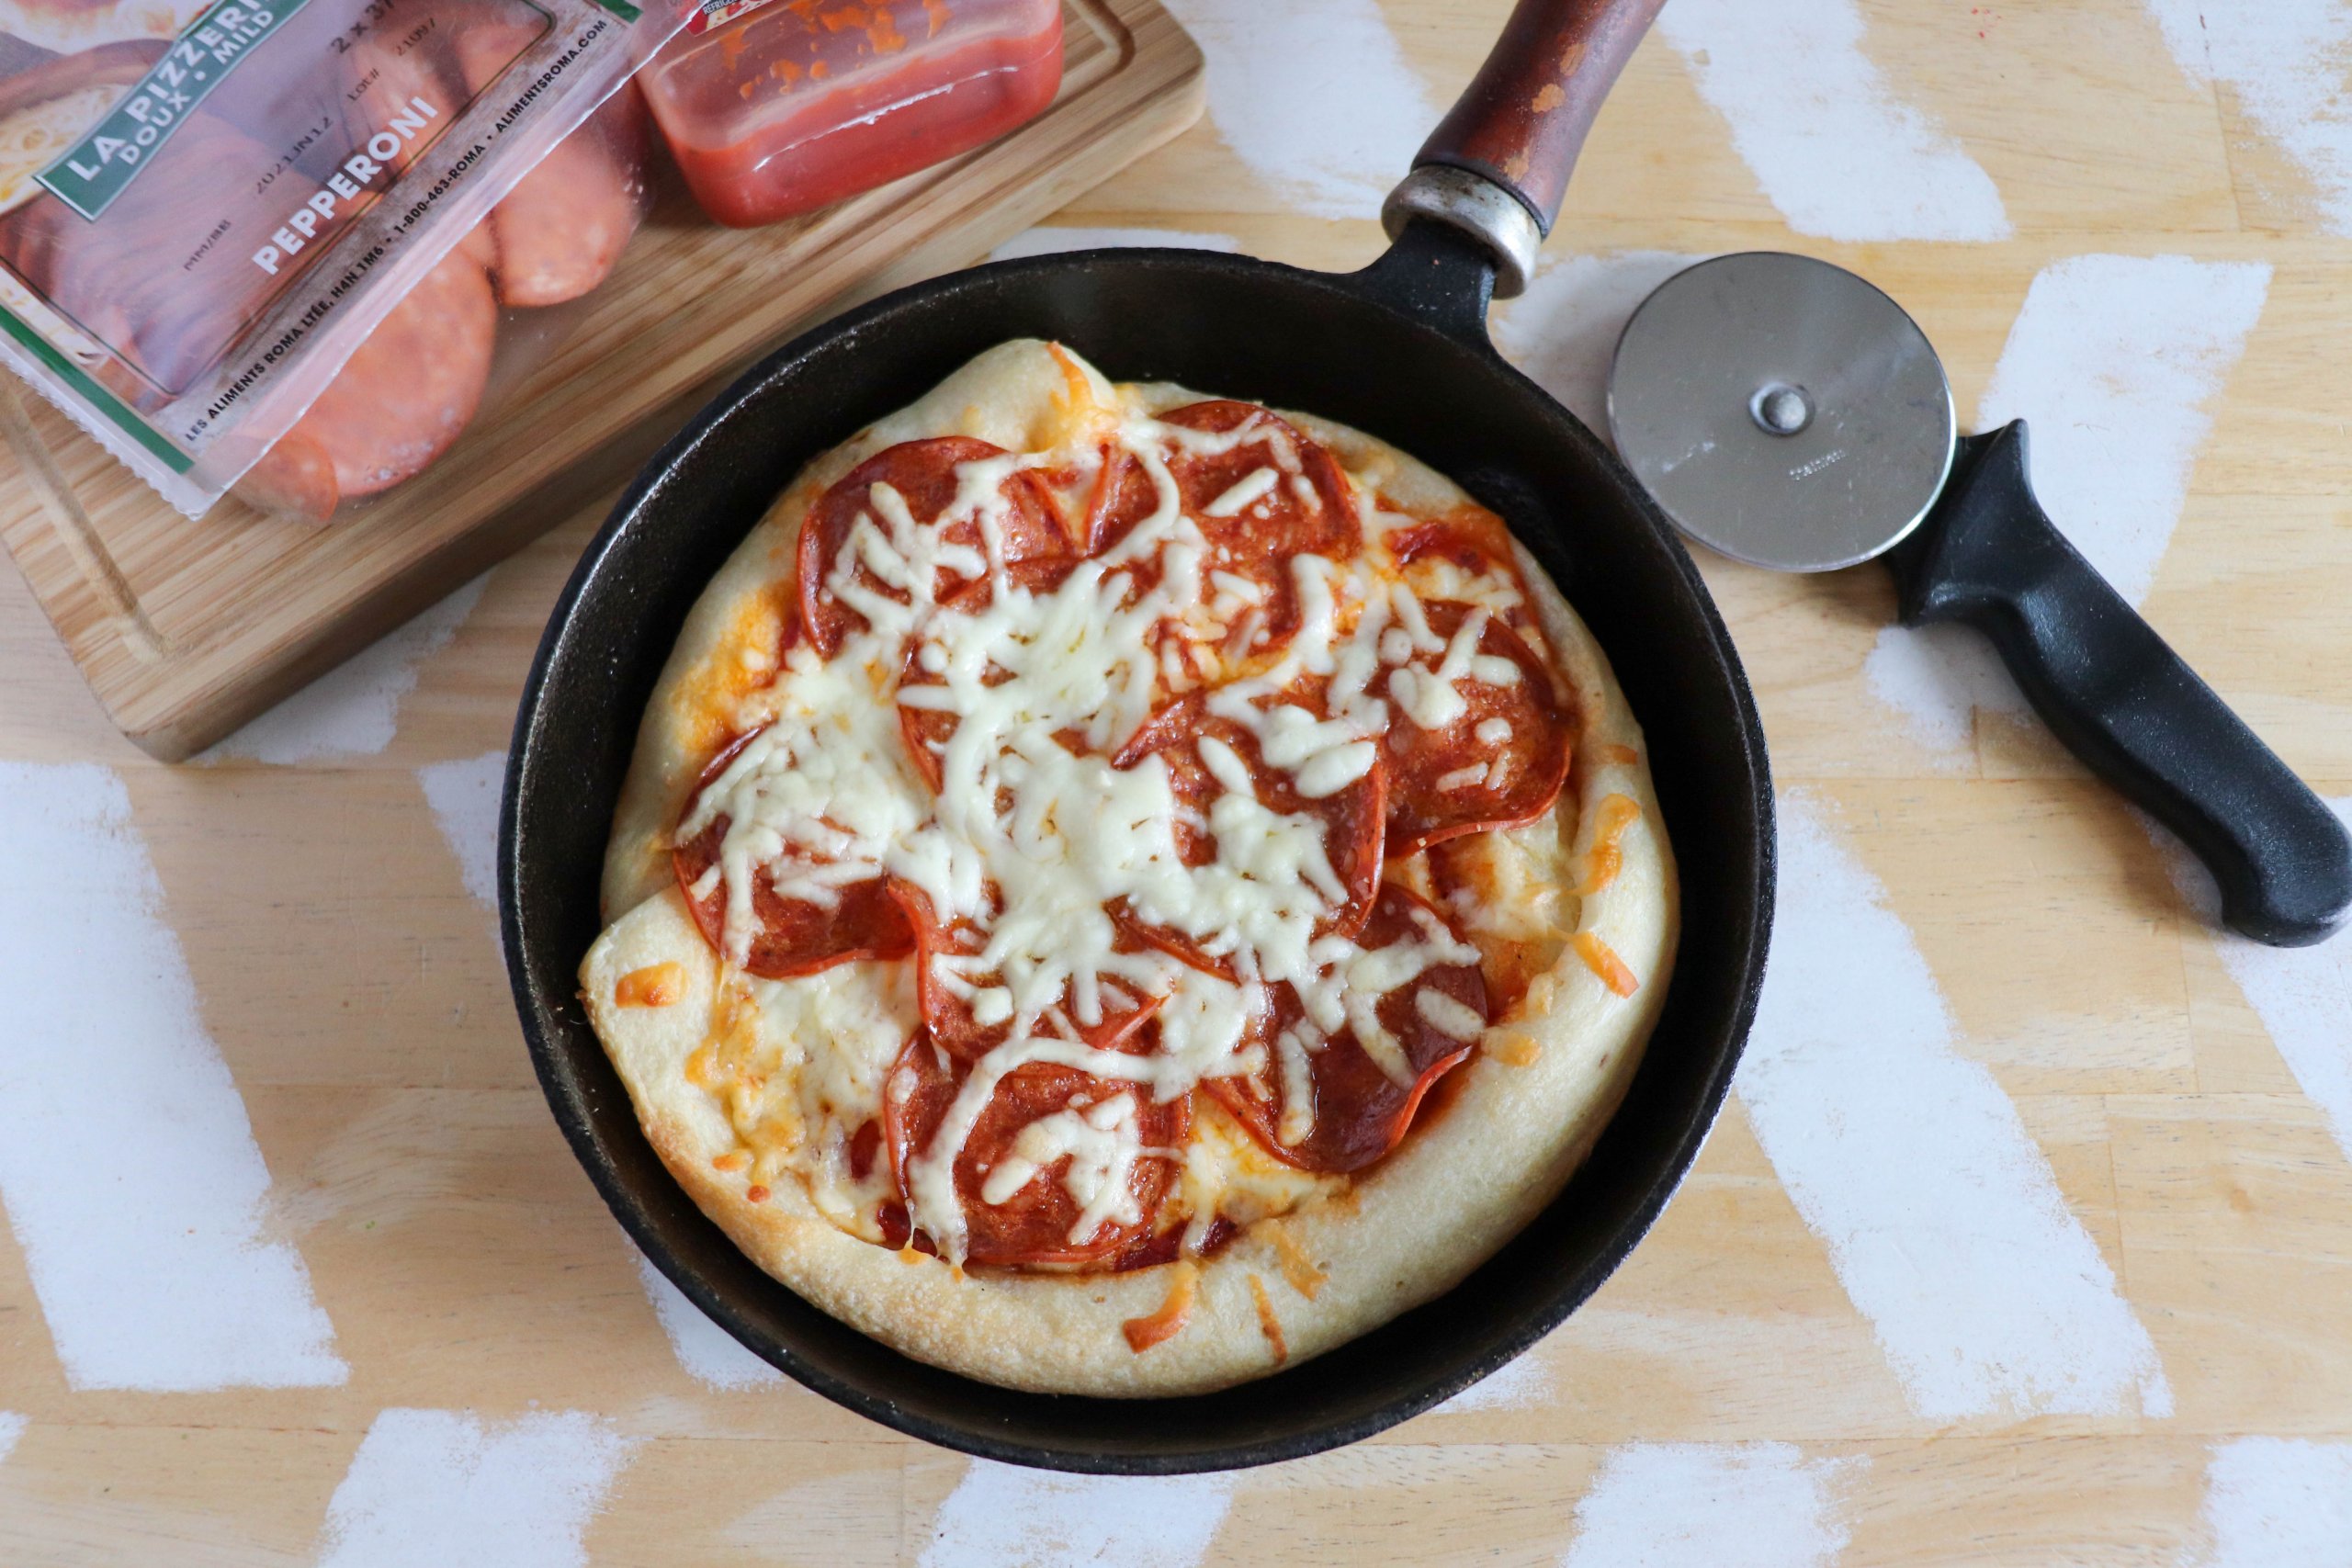 Skillet pizza with tomato sauce, shredded mozzarella and pepperoni slices in a cast iron skillet on a wooden table.